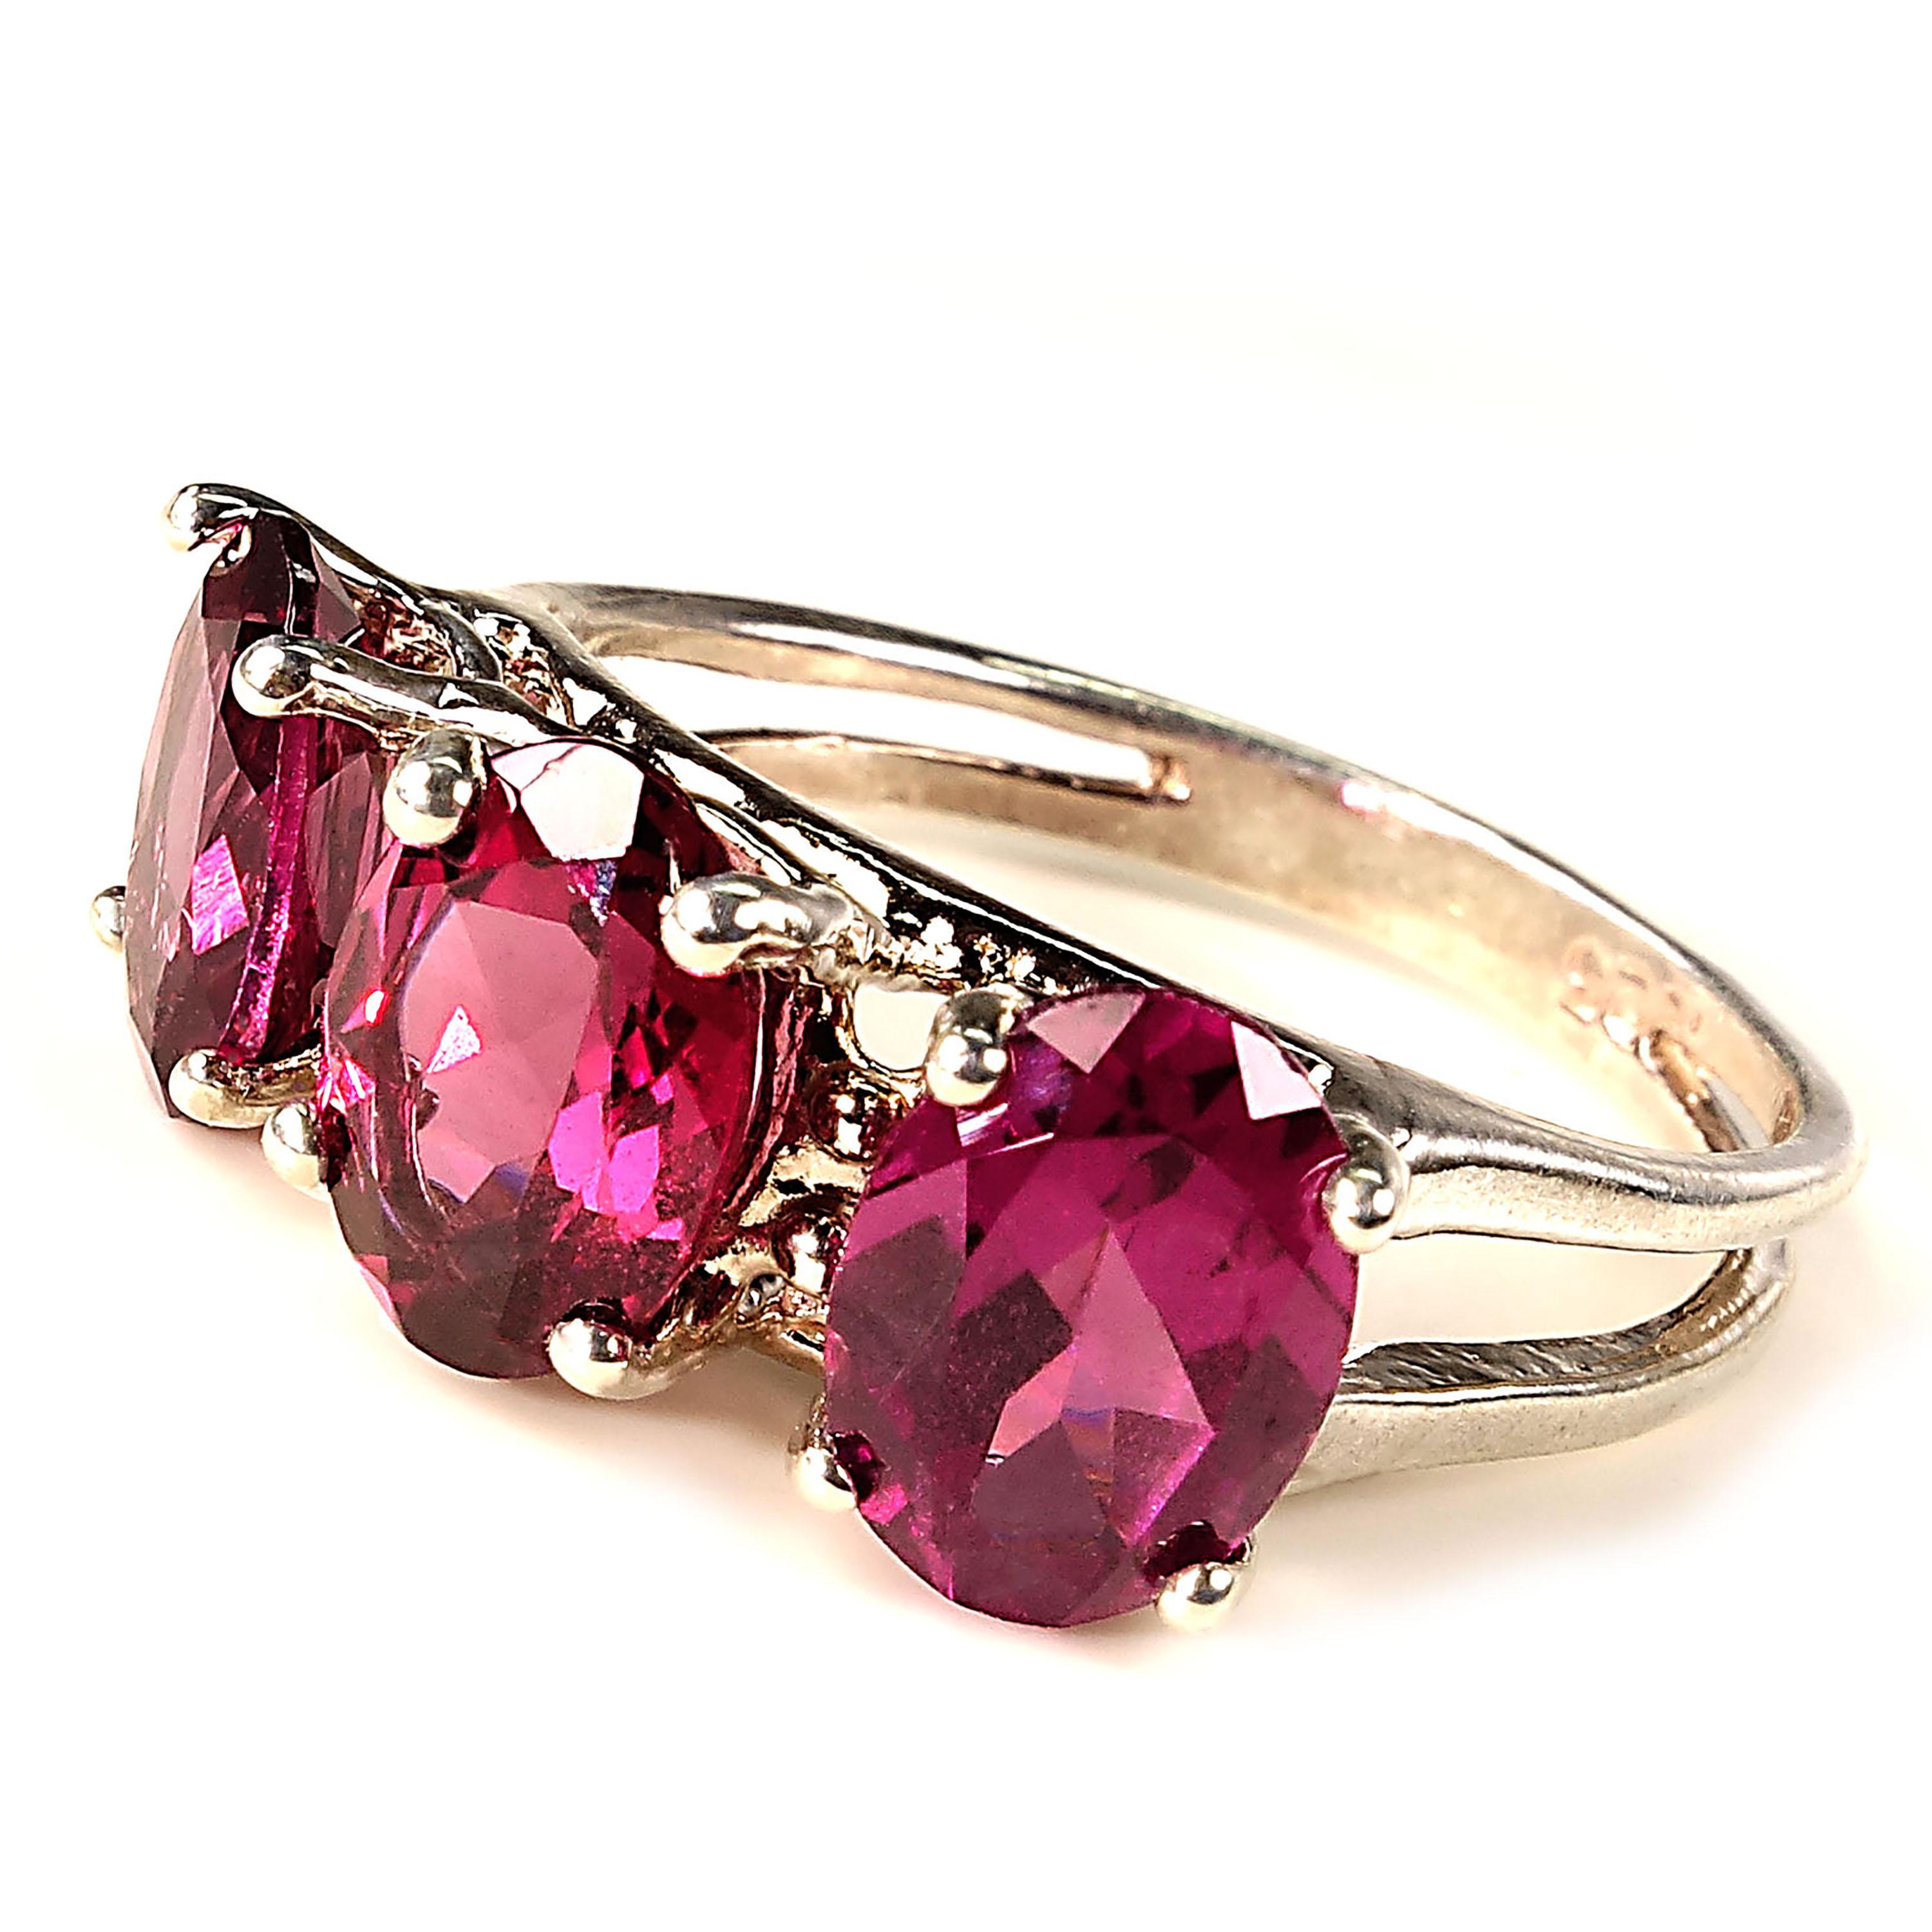 Custom made ring of three side by side sparkling oval  Rhodolite Garnets set in Sterling Silver.  These glorious Garnets are of a pinkish to purple shade of red Garnet in the pyrope family. The Rhodolite name comes from the Greek 'rhodon' as in